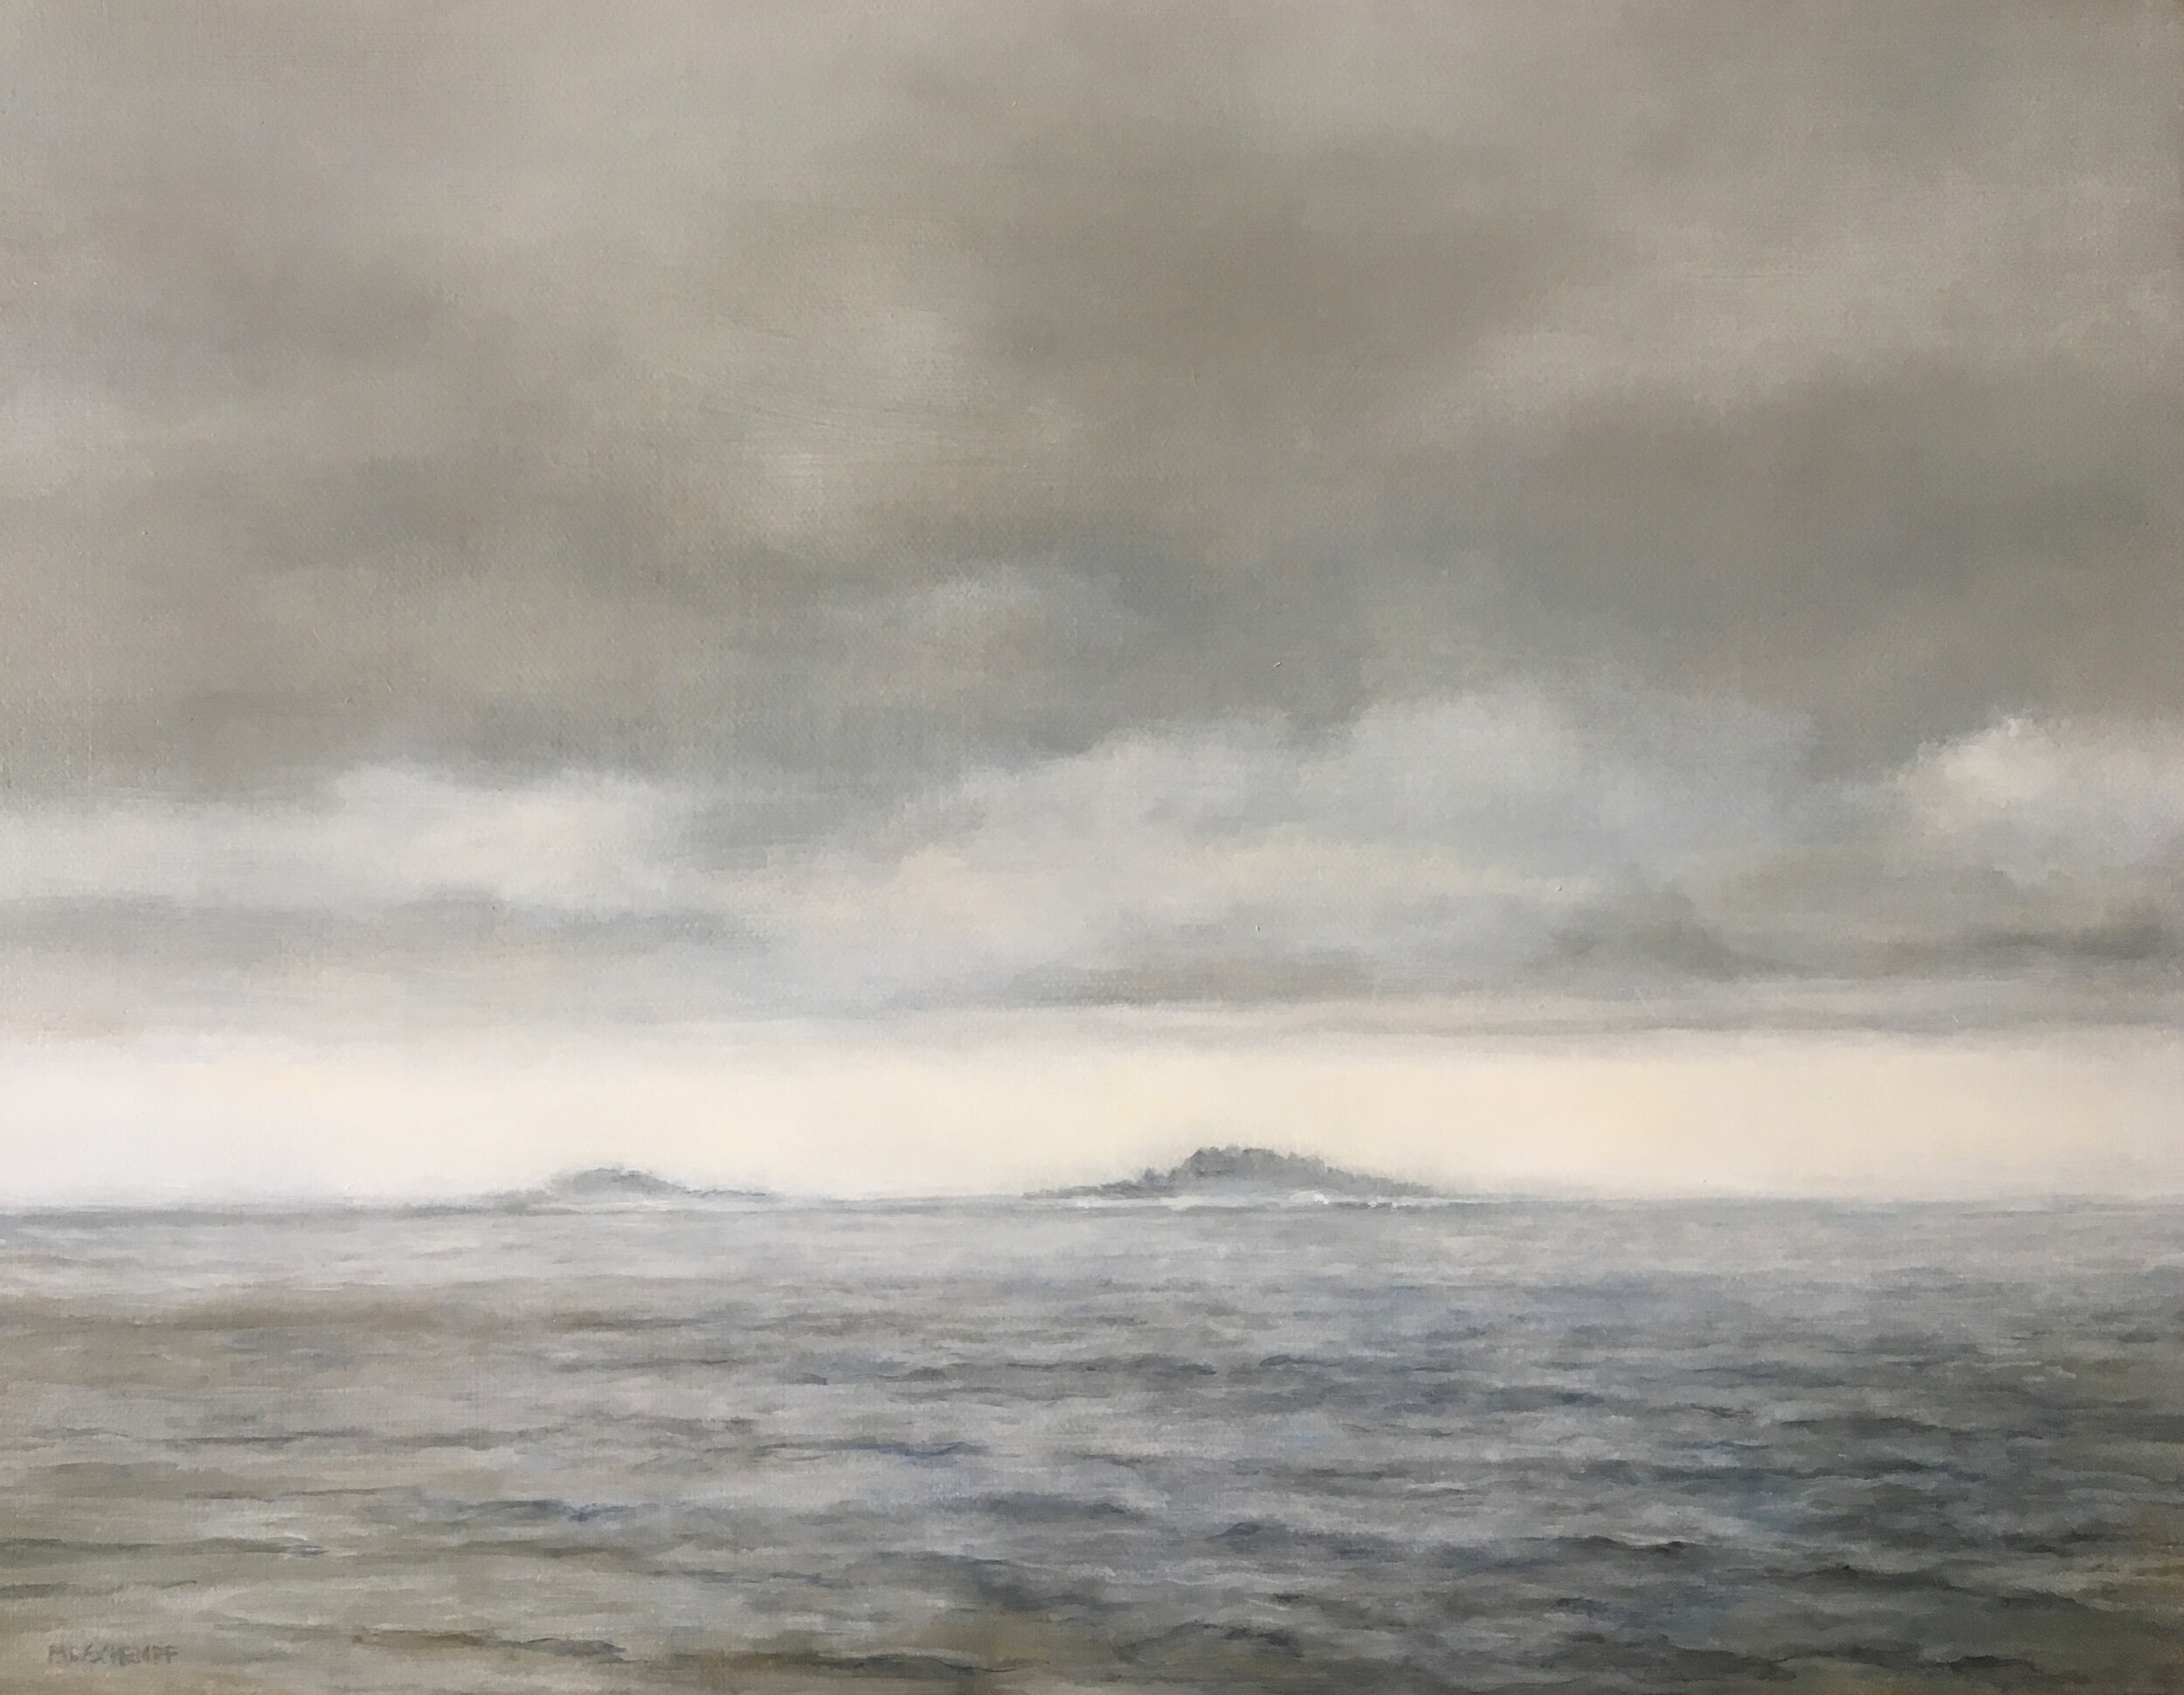  Mary Lou Schempf  Gouldsboro Bay Fog,  11” x 14”, oil on linen  (private collection)  